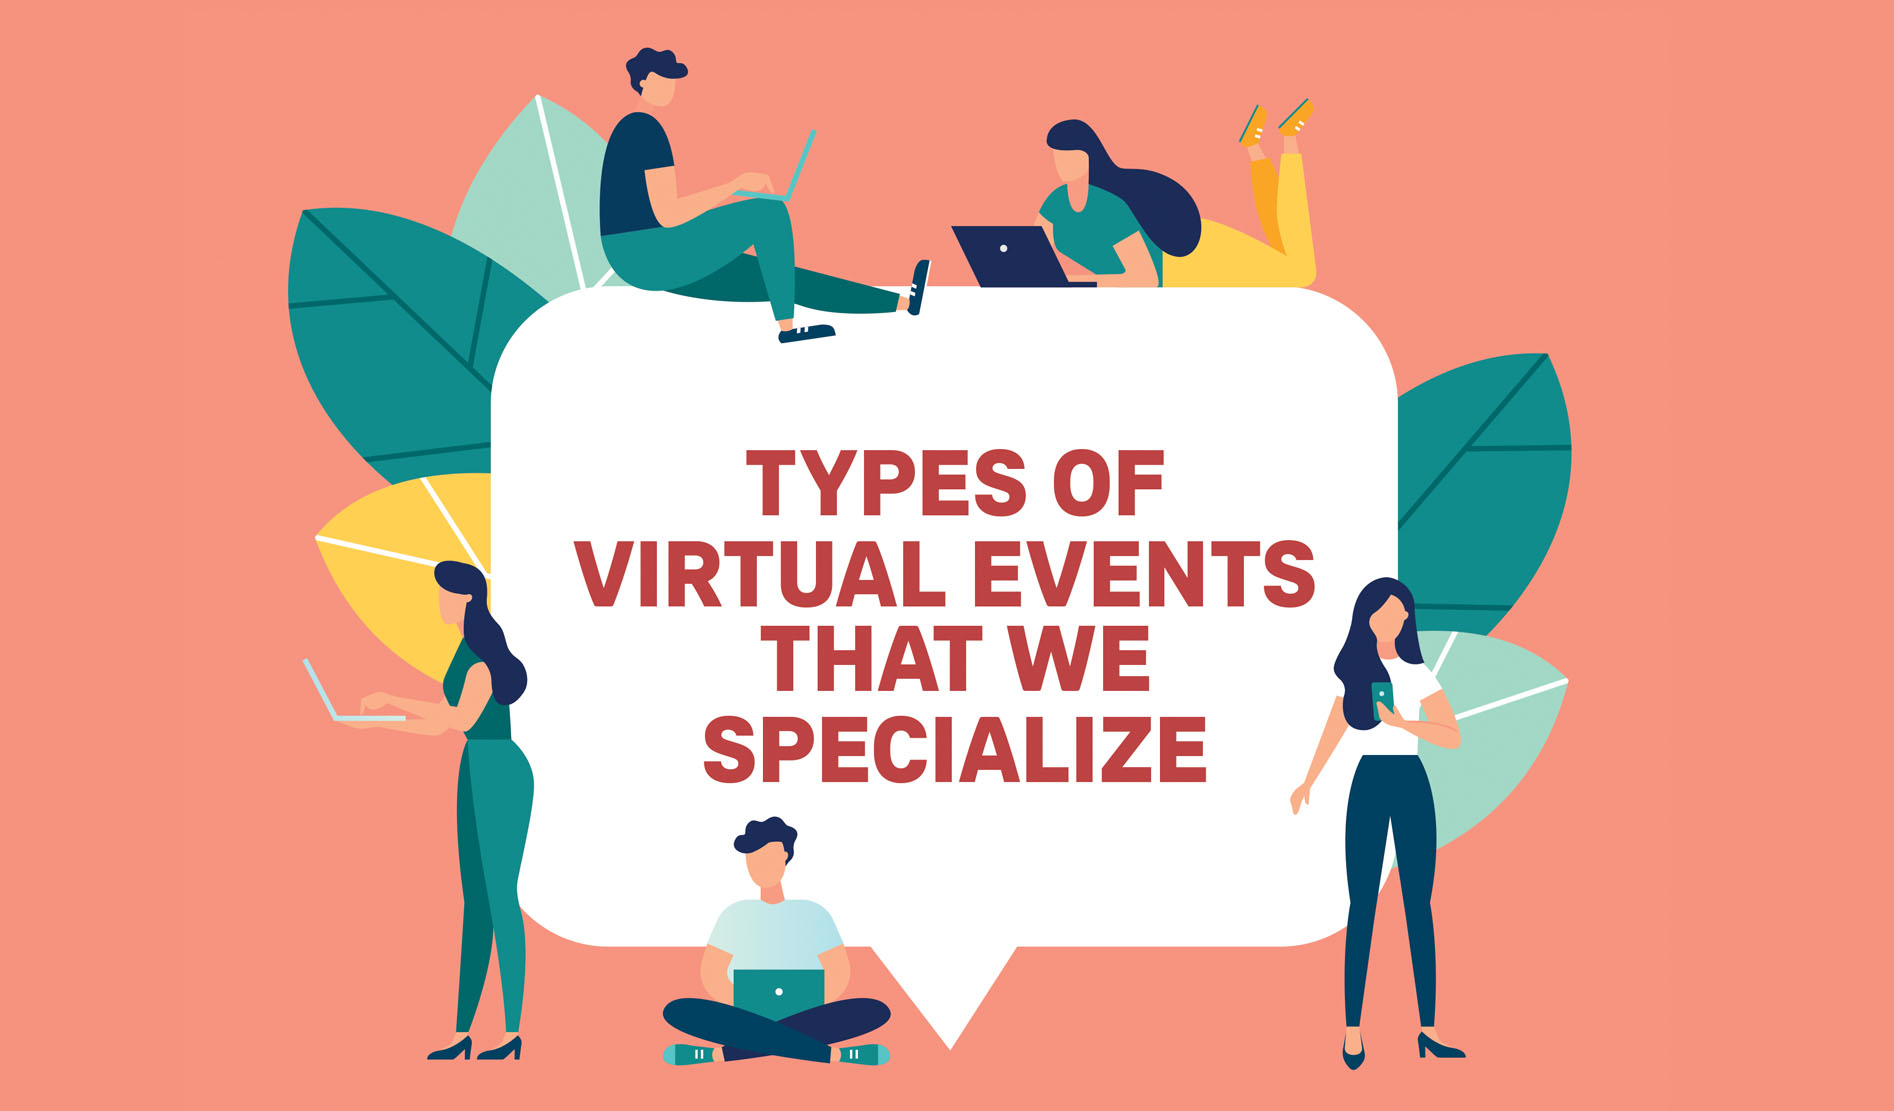 Types of virtual events that we specialise